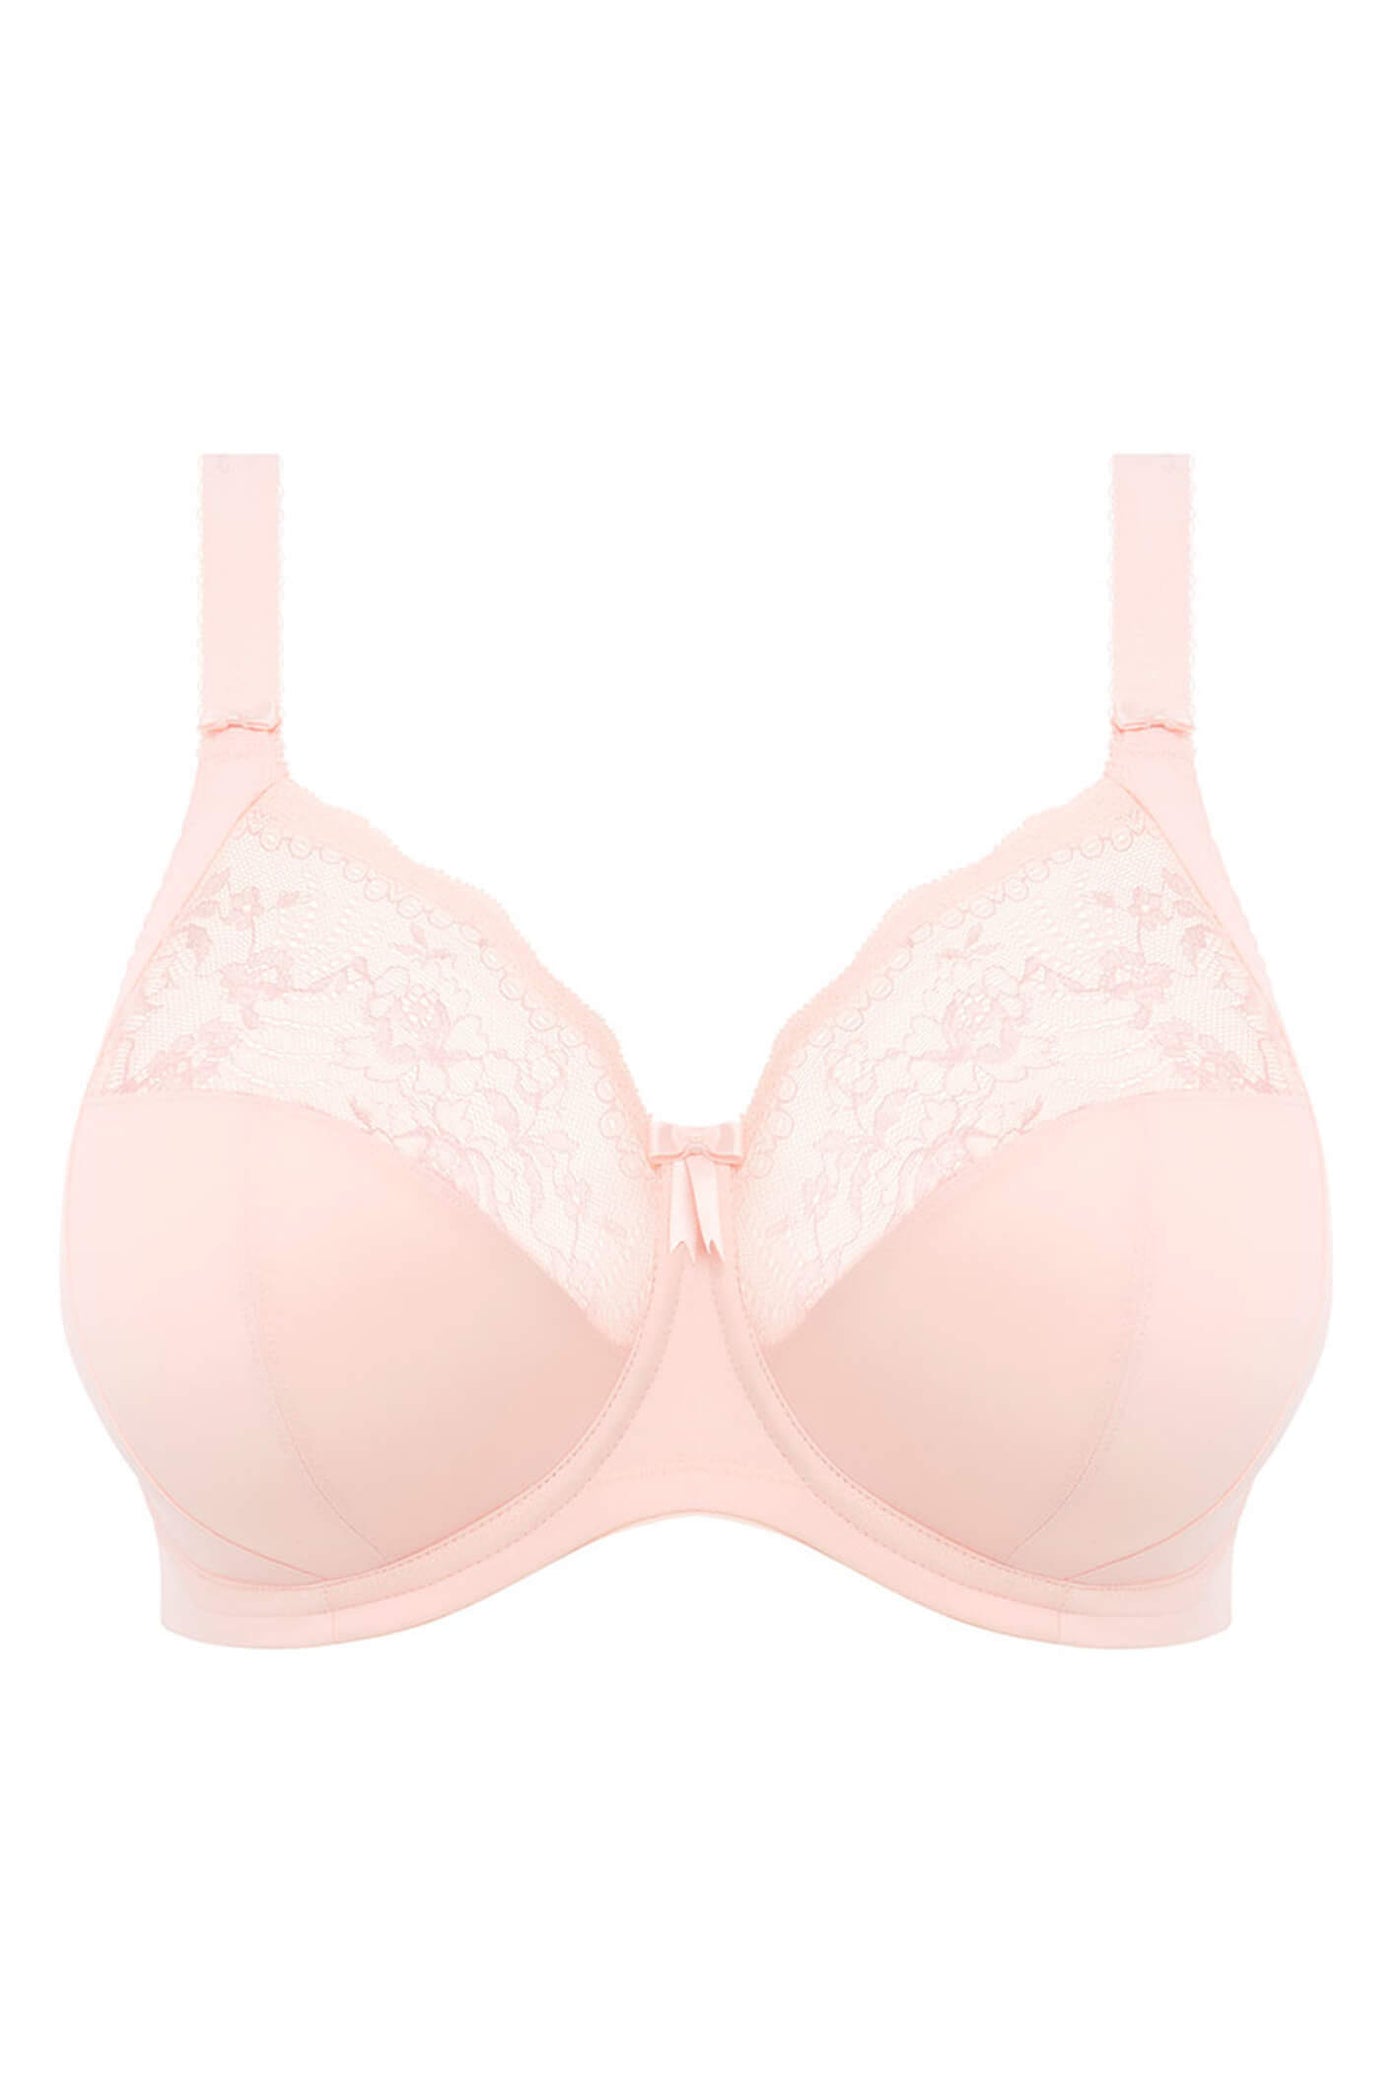 Elomi EL4111BAK Morgan Ballet Pink Stretch Banded Underwired Full Cup Bra - Rouge Boutique Inverness